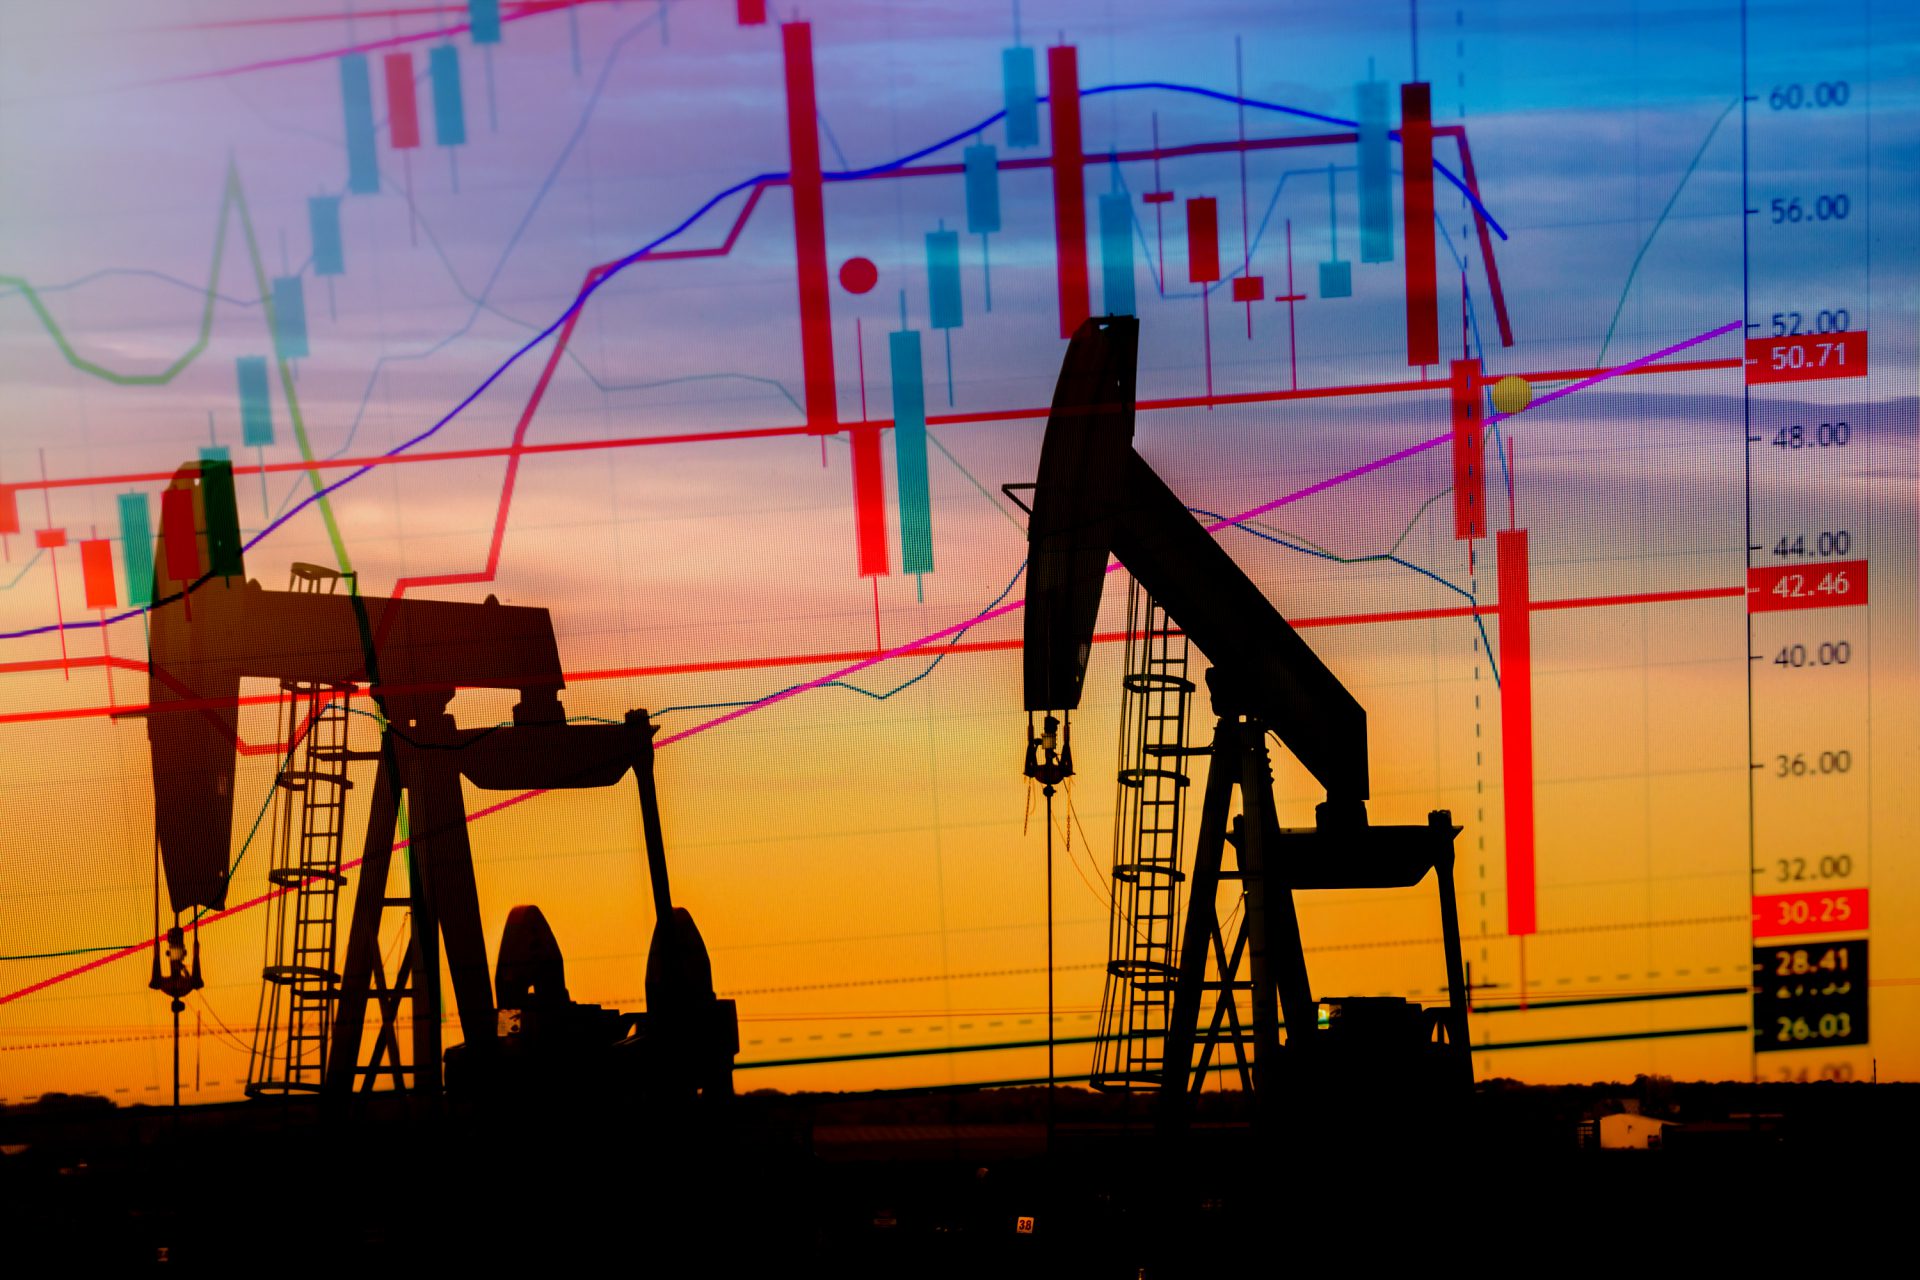 Illustration depicting the historic fall in the price of oil with an oil well in silhouette in the background